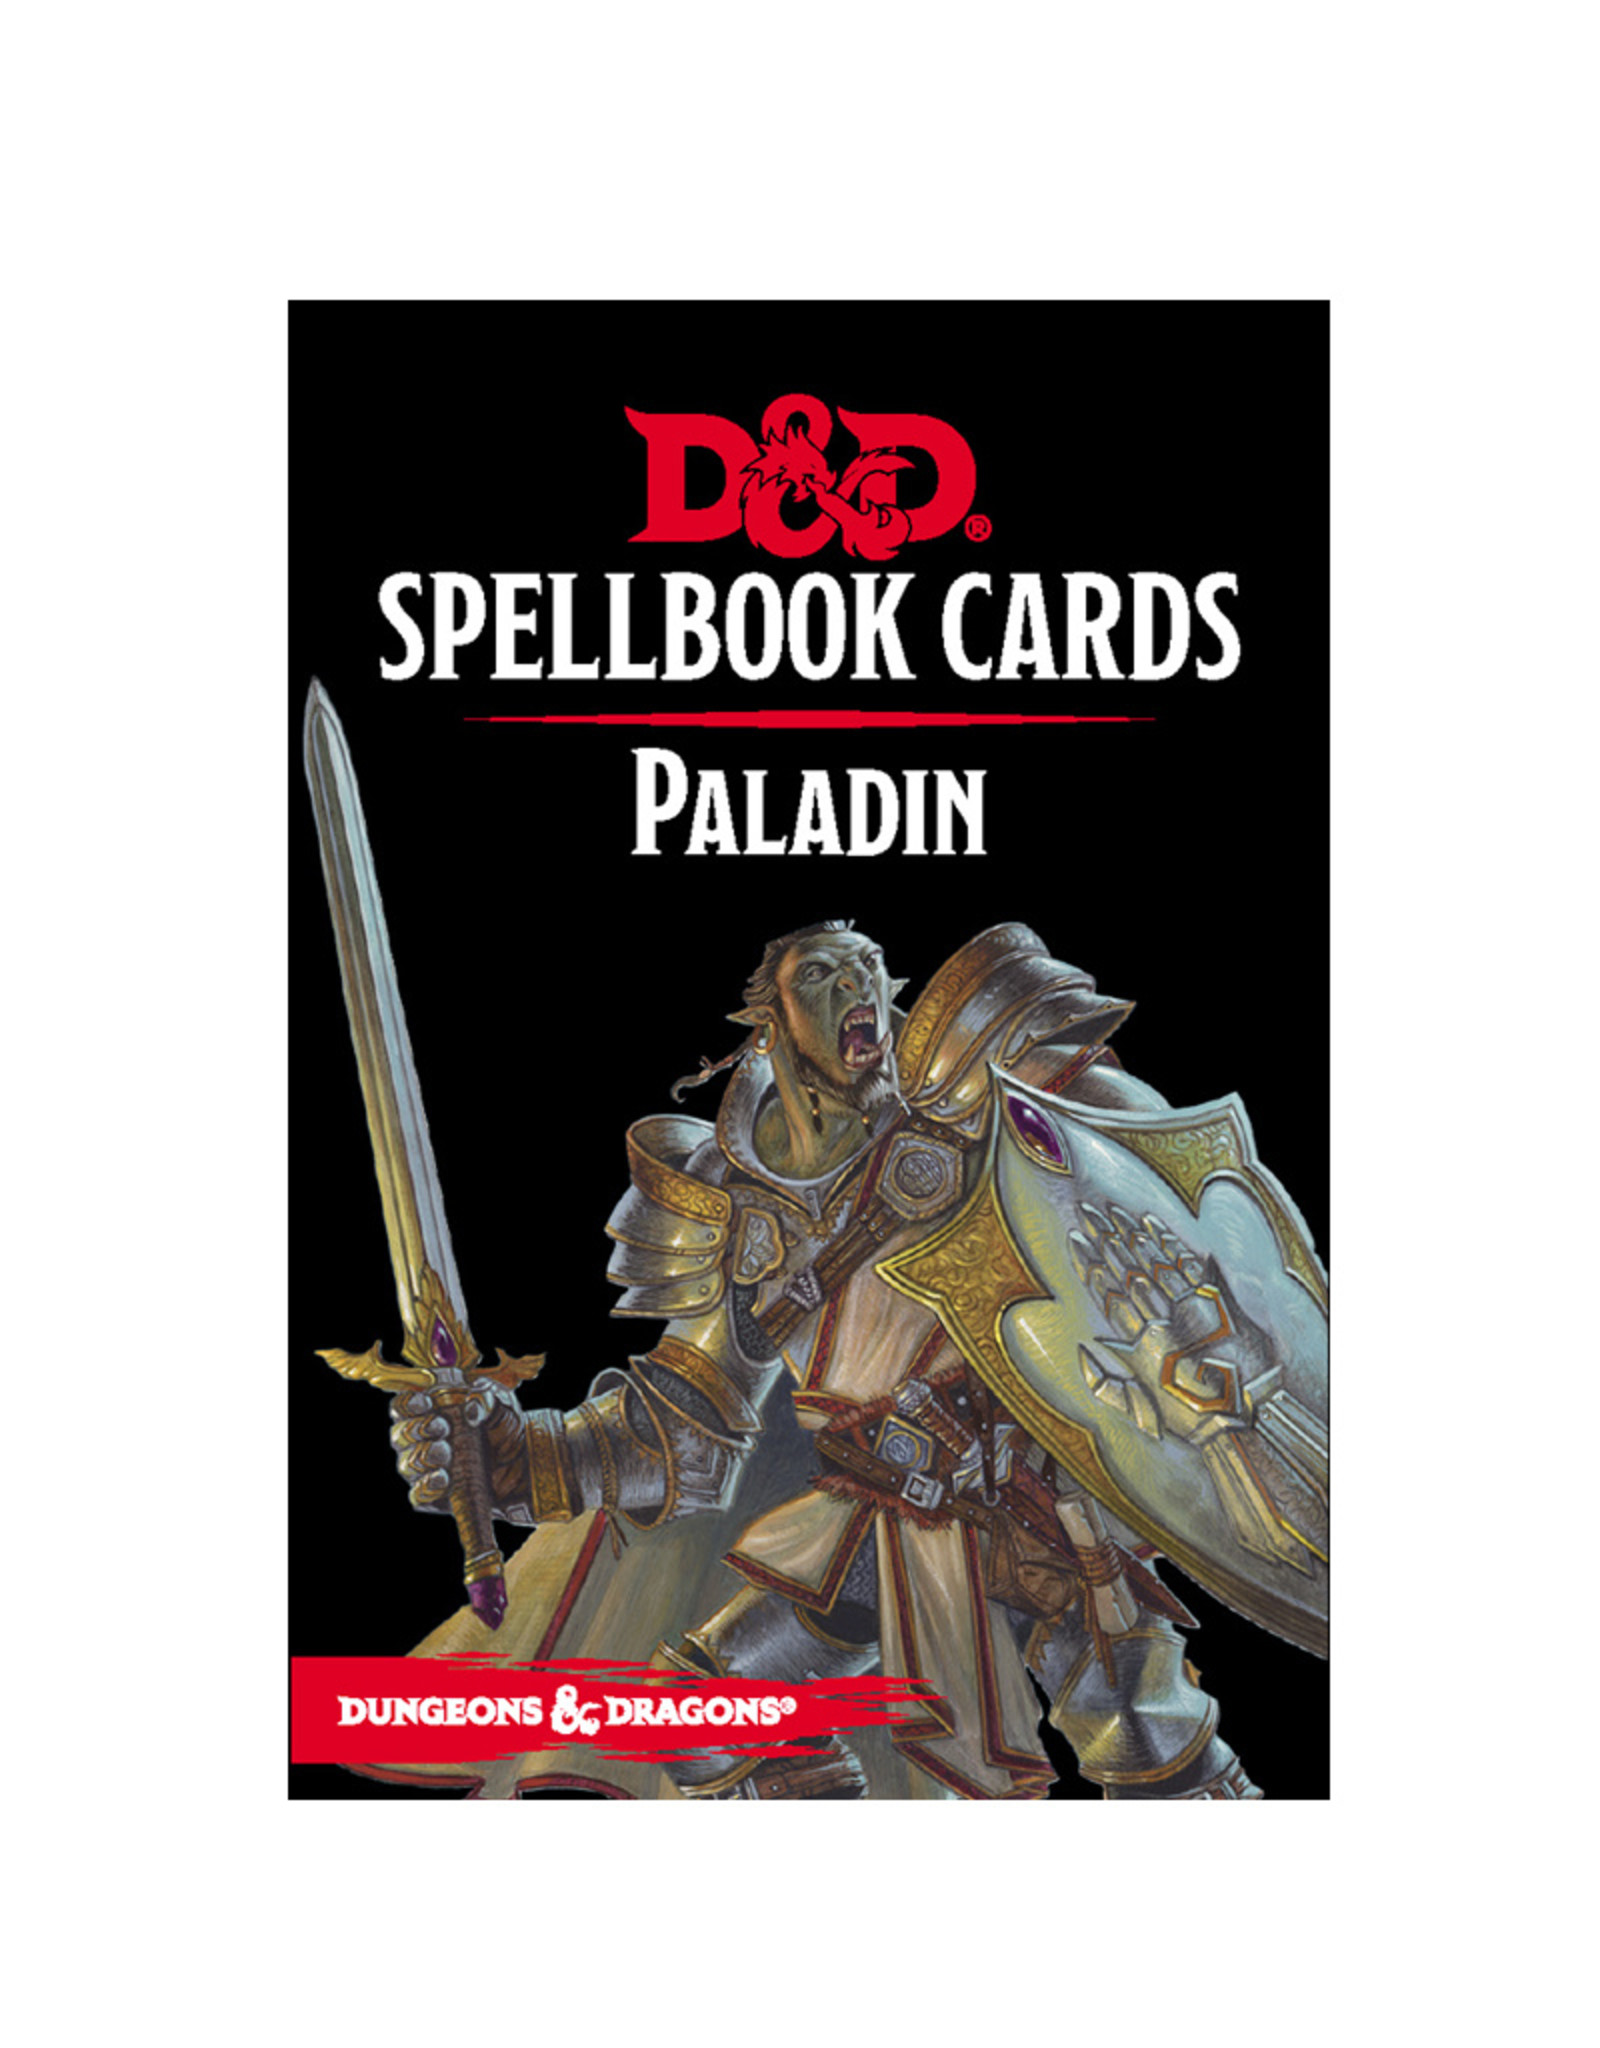 Wizards of the Coast D&D Spell Cards: Paladin